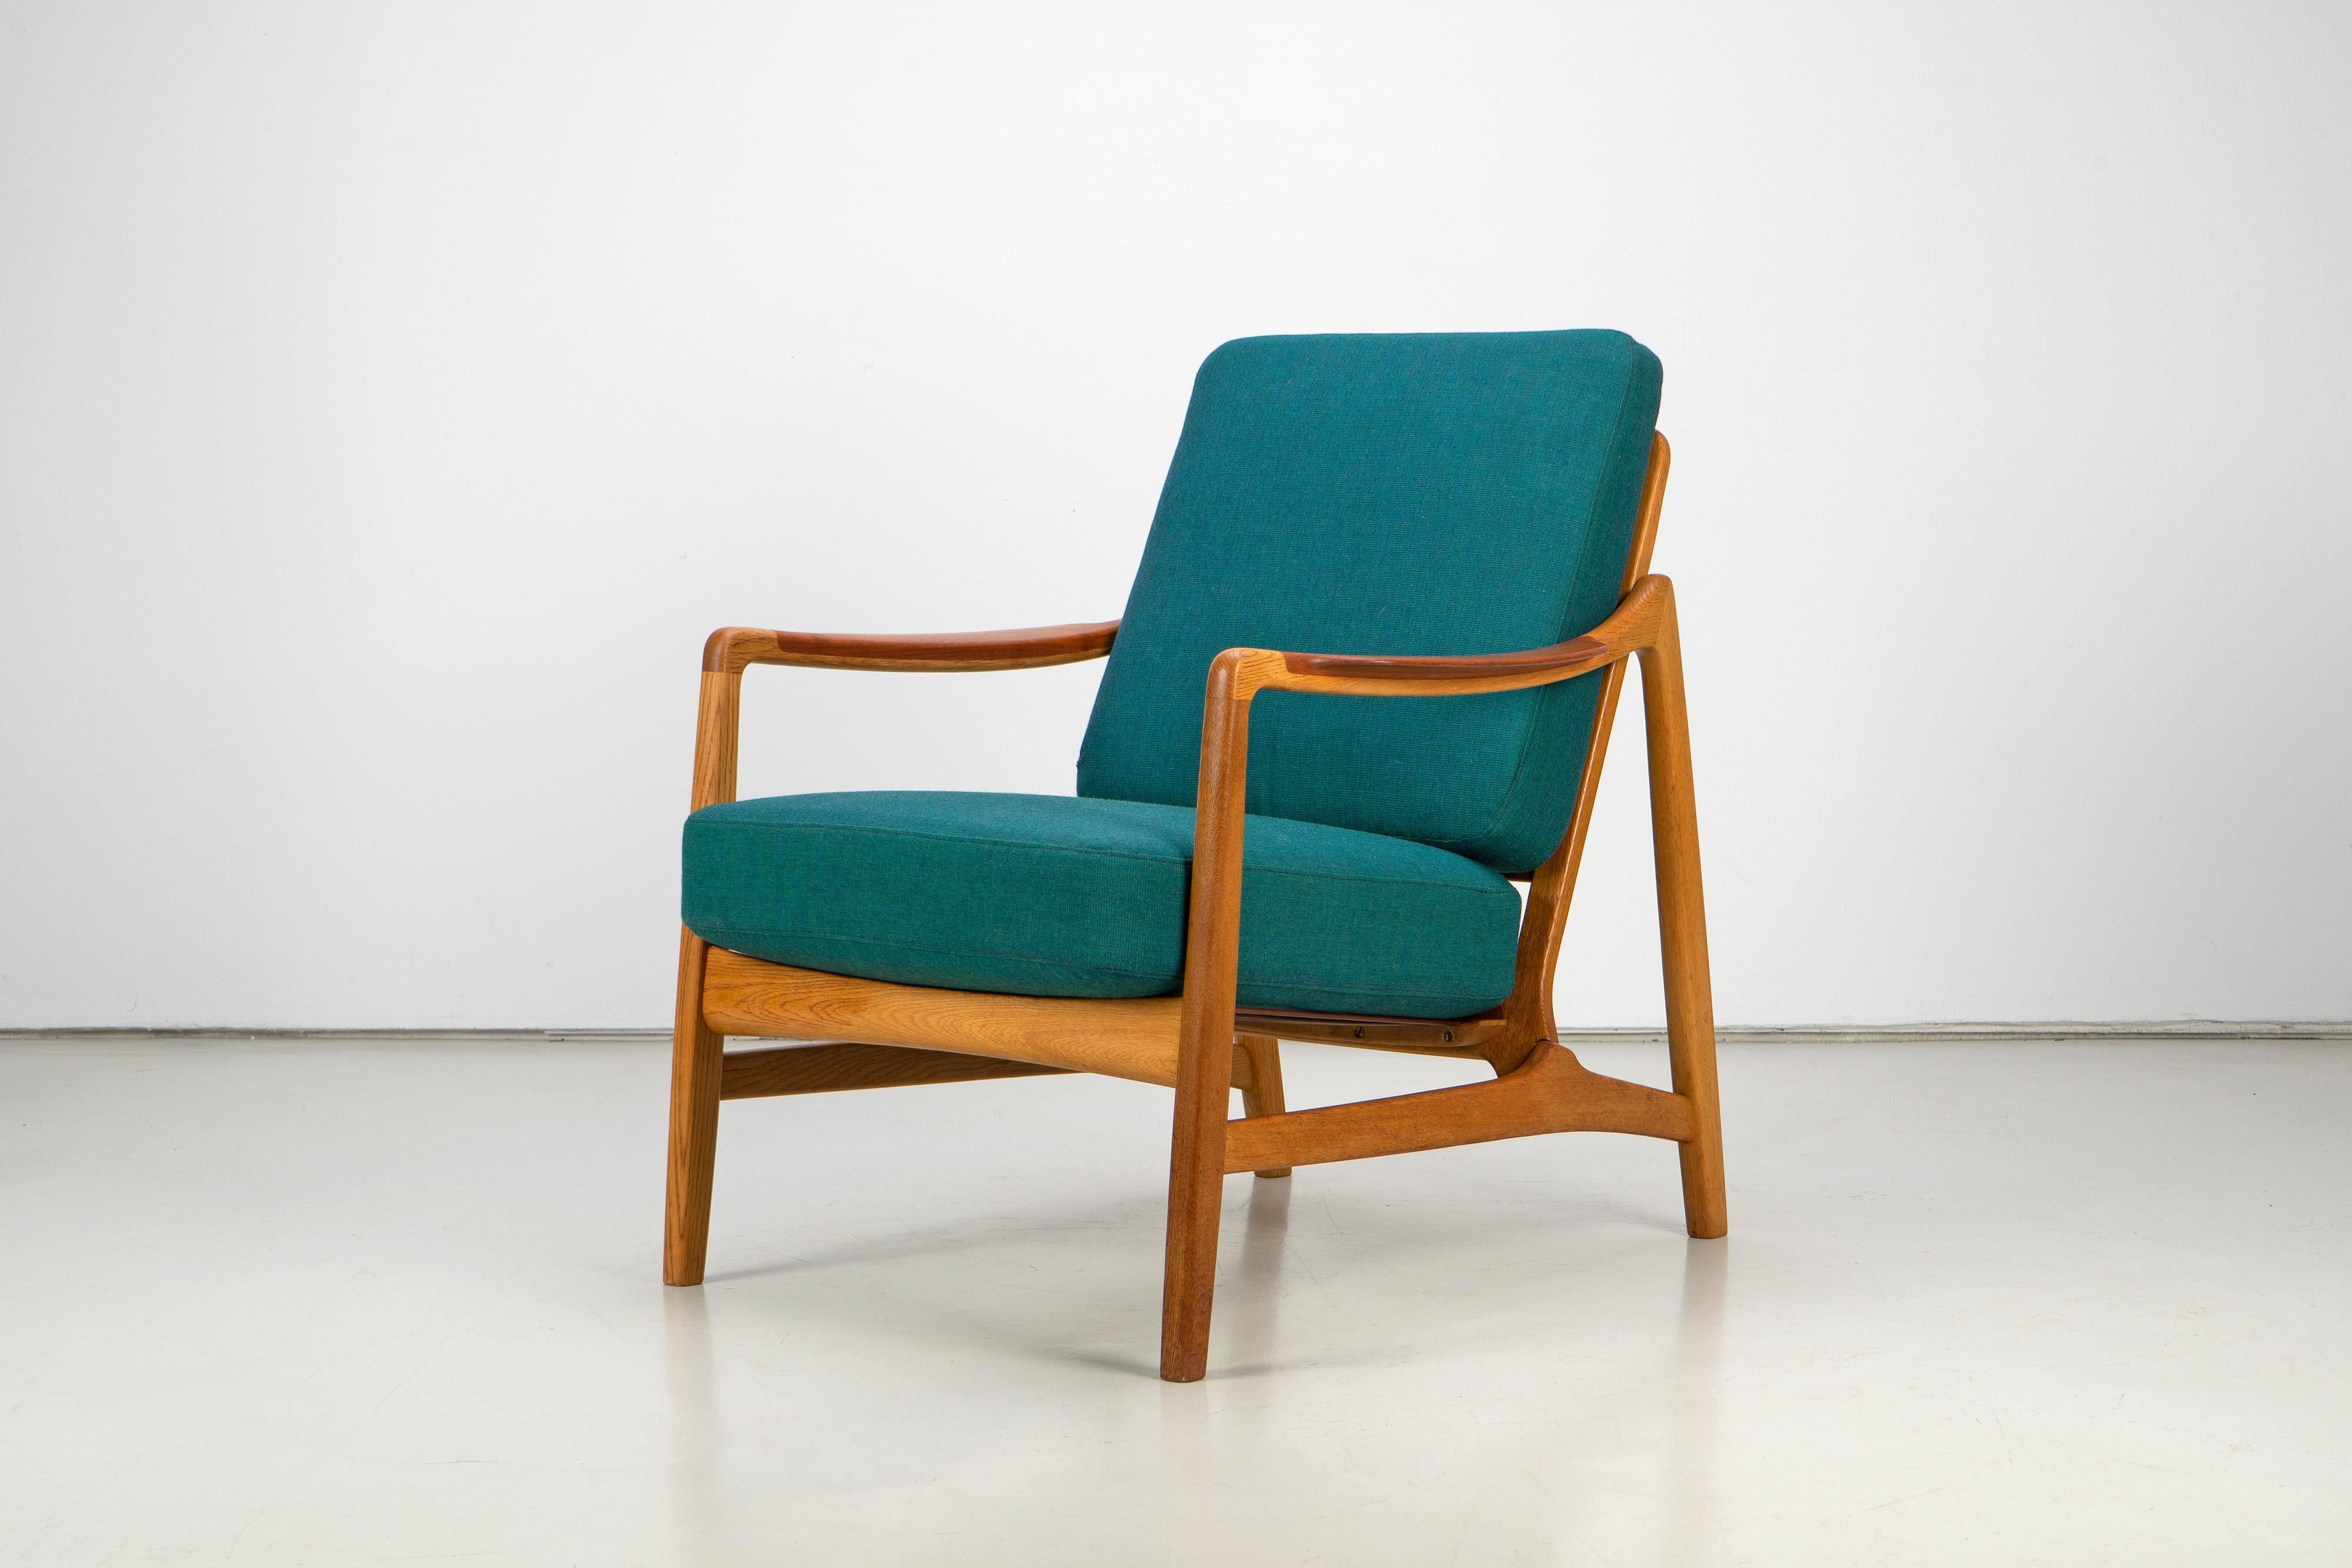 Rare design classic by Tove & Edvard Kindt-Larsen produced by France & Daverkosen in Denmark. Organically shaped oak frame with beautiful teak armrests. The innerspring cushions were reupholstered with the quality upholstery fabric by Kvadrat. Very